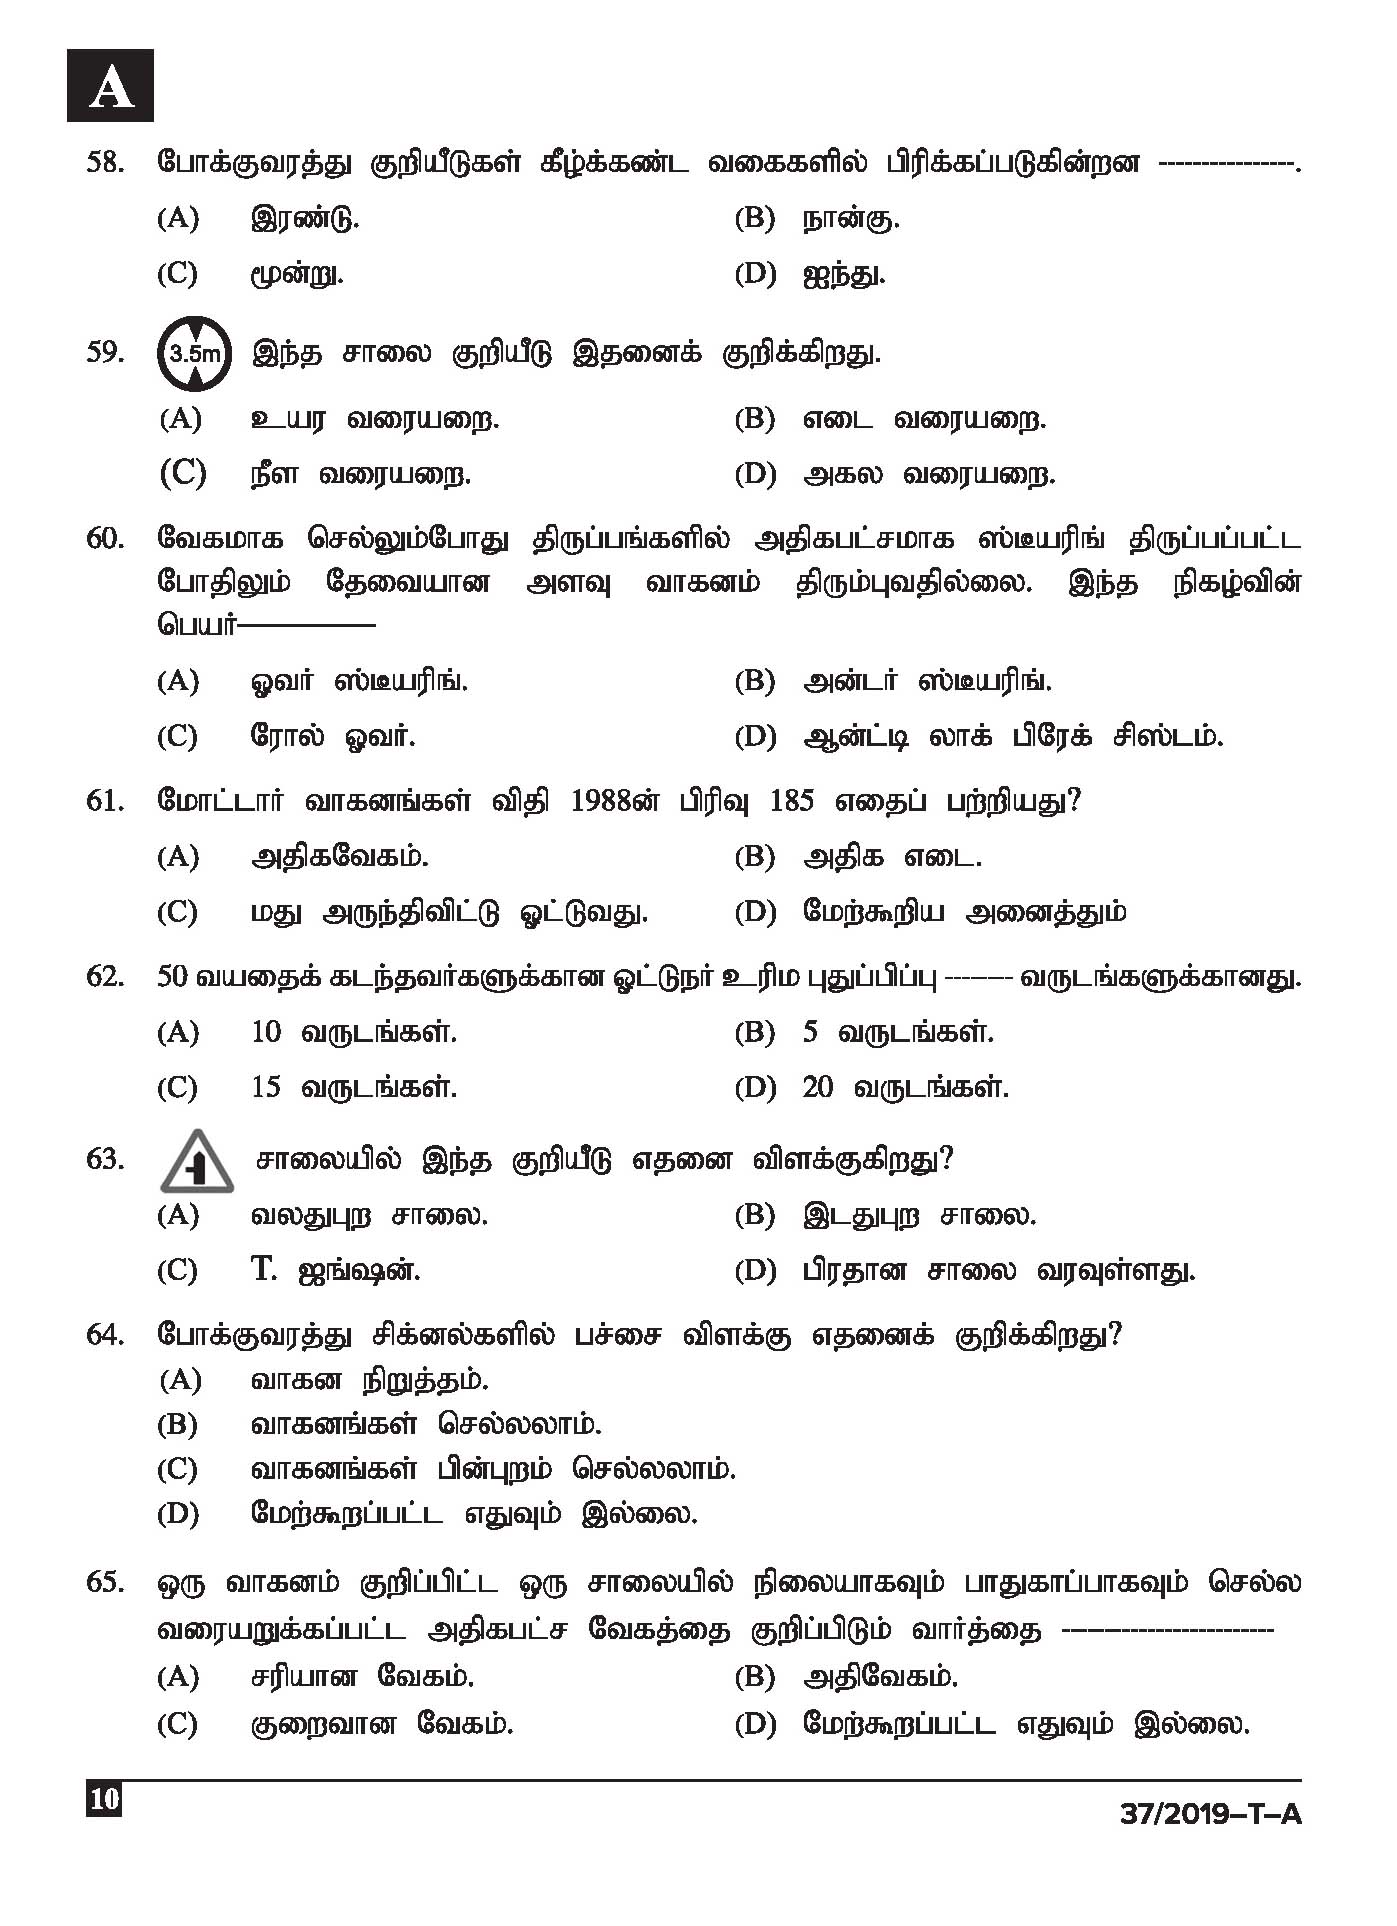 KPSC Driver and Office Attendant Tamil Exam 2019 Code 372019 T 9